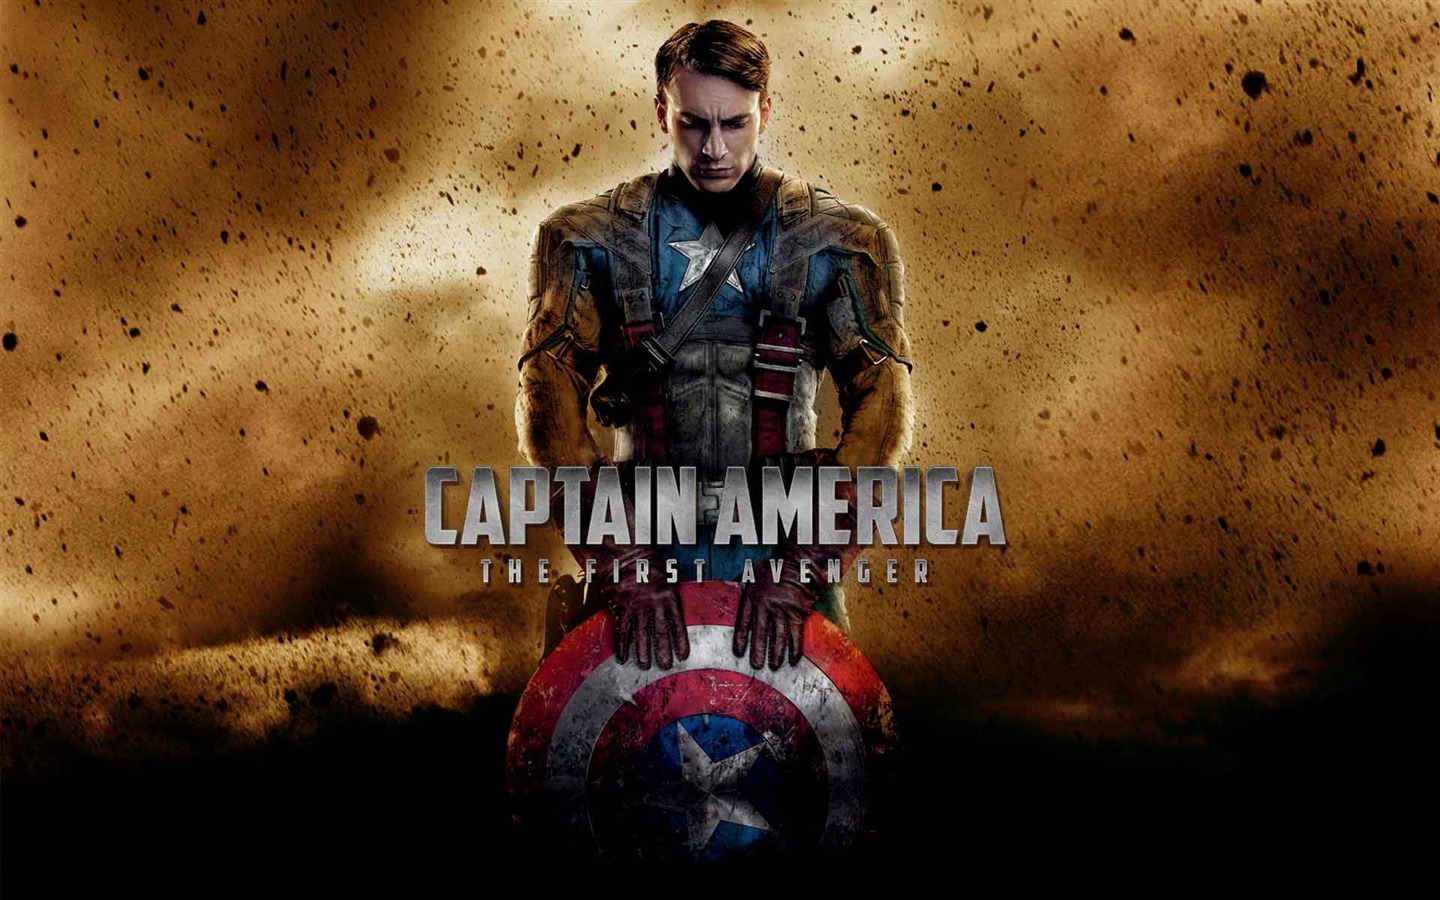 Captain America: The First Avenger wallpapers HD #7 - 1440x900